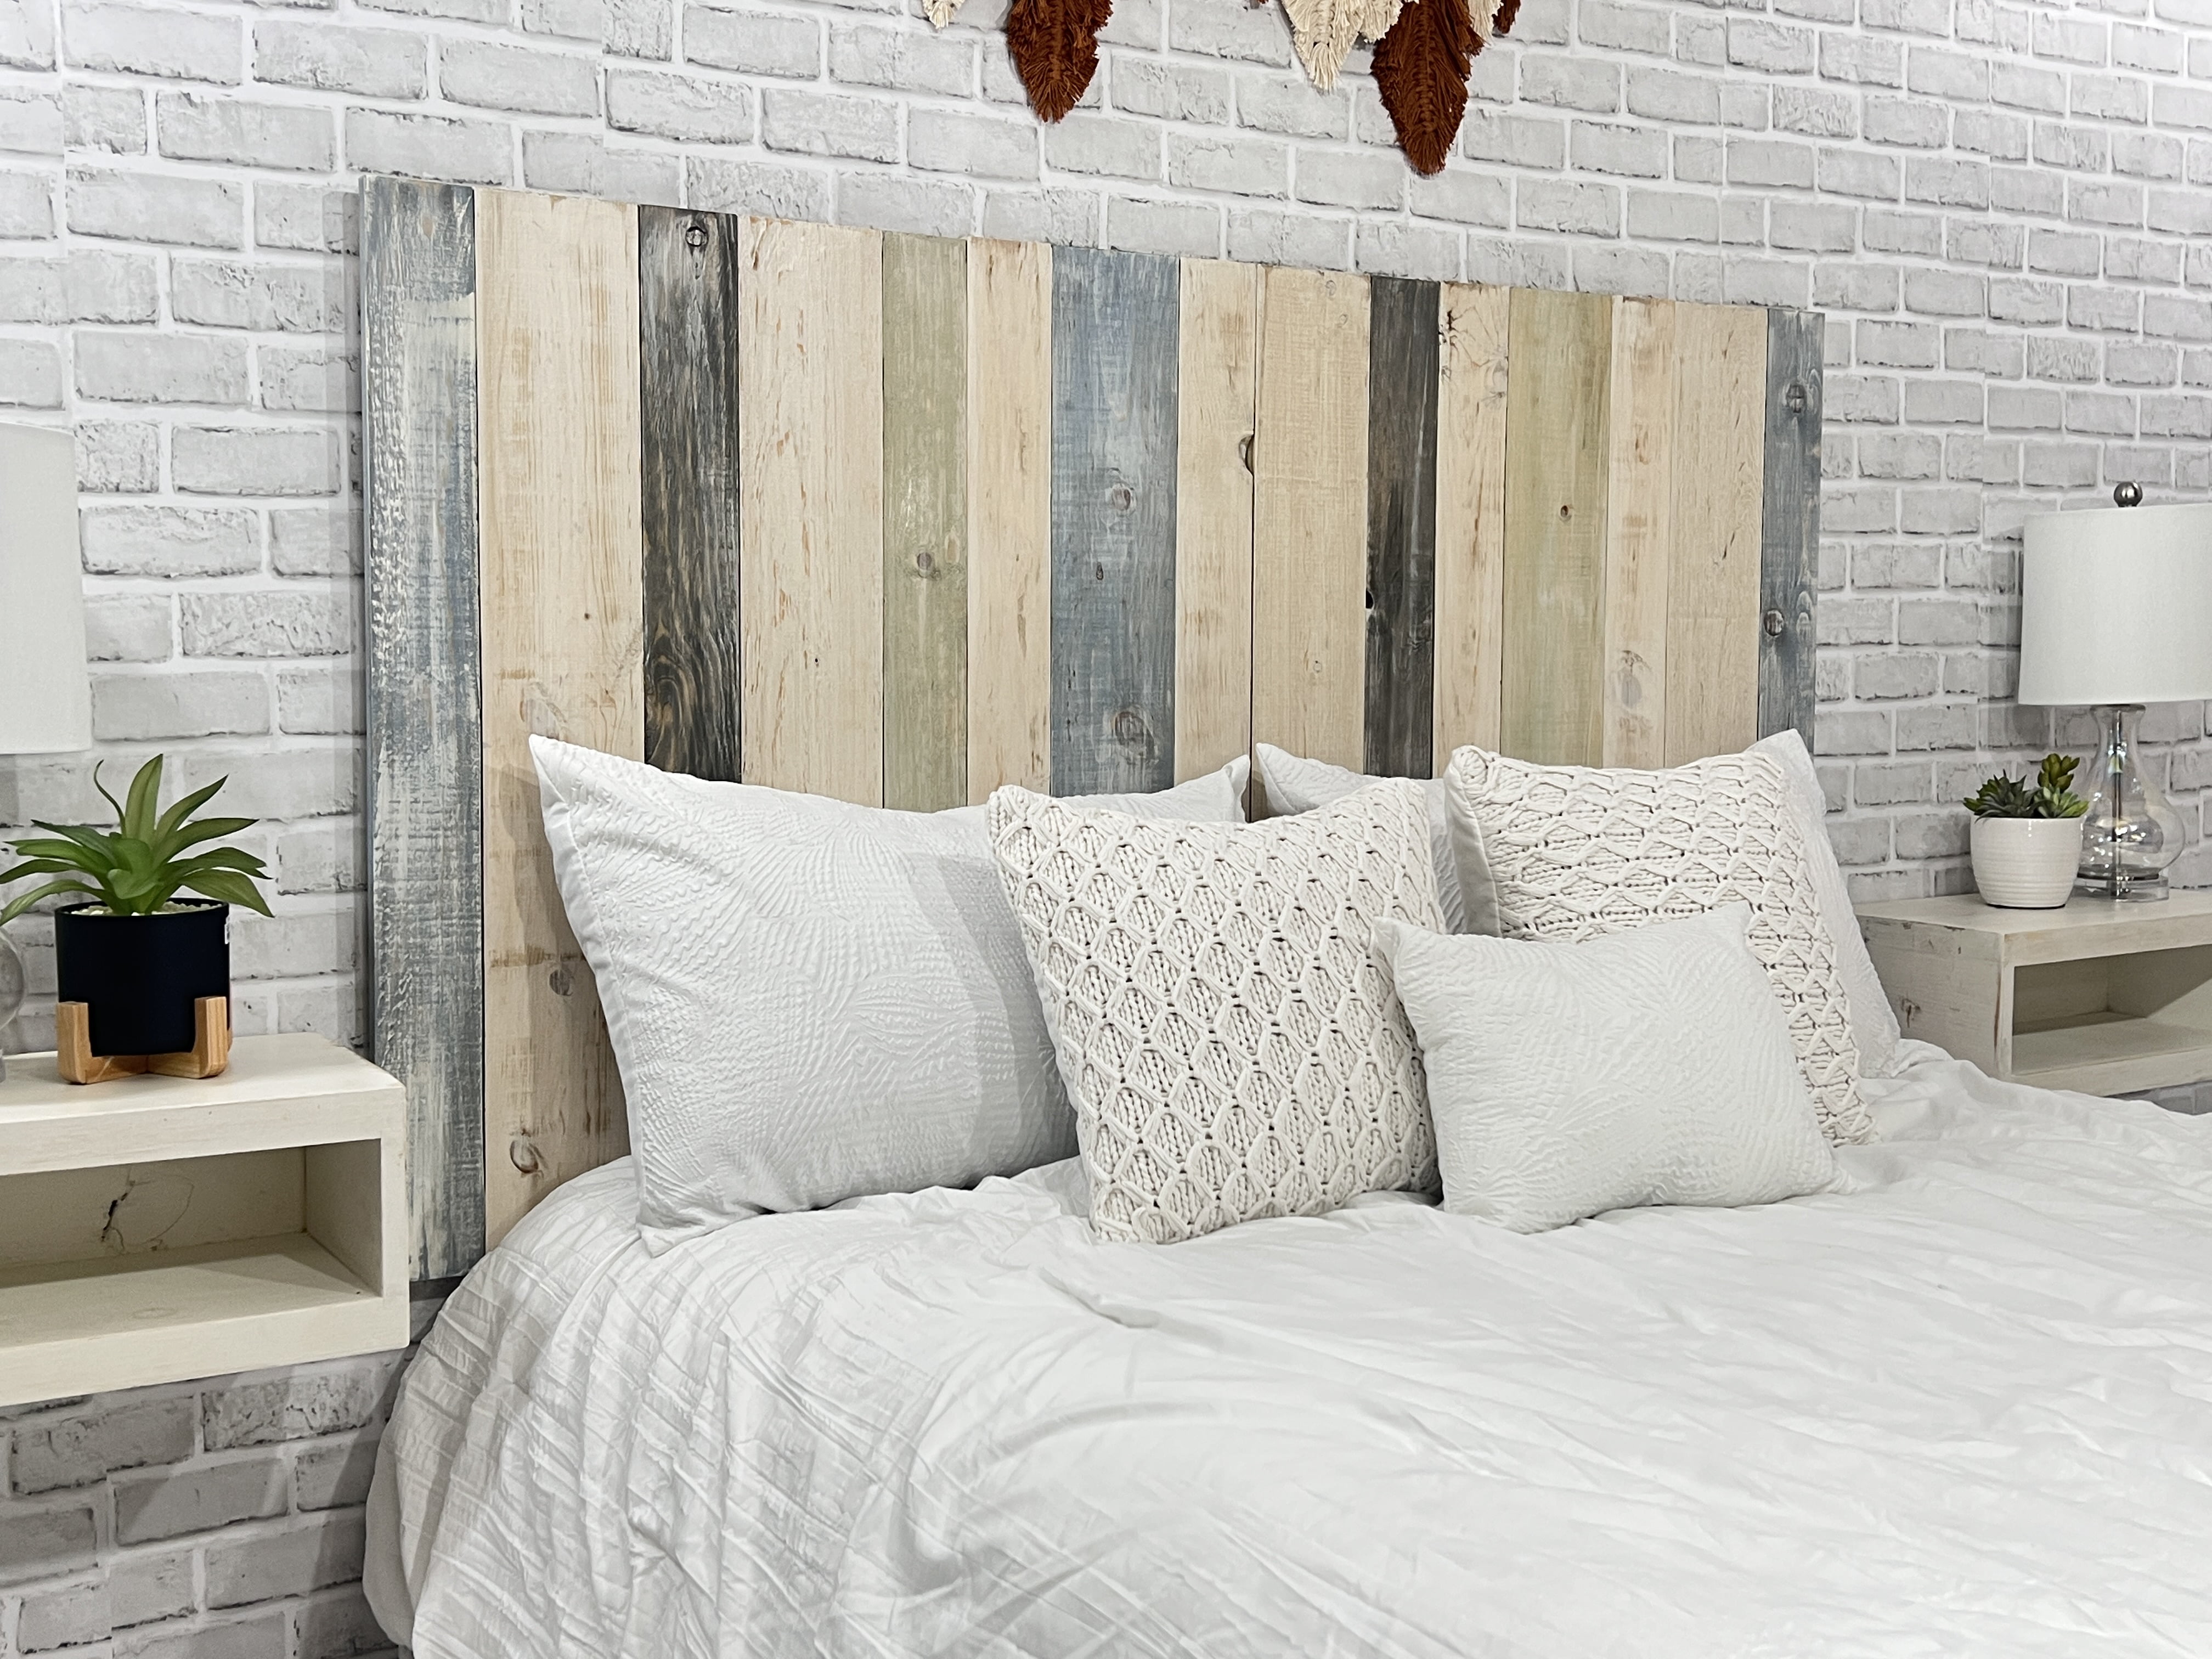 Mounts on Wall. Hanger Style Handcrafted Farmhouse Mix Headboard 